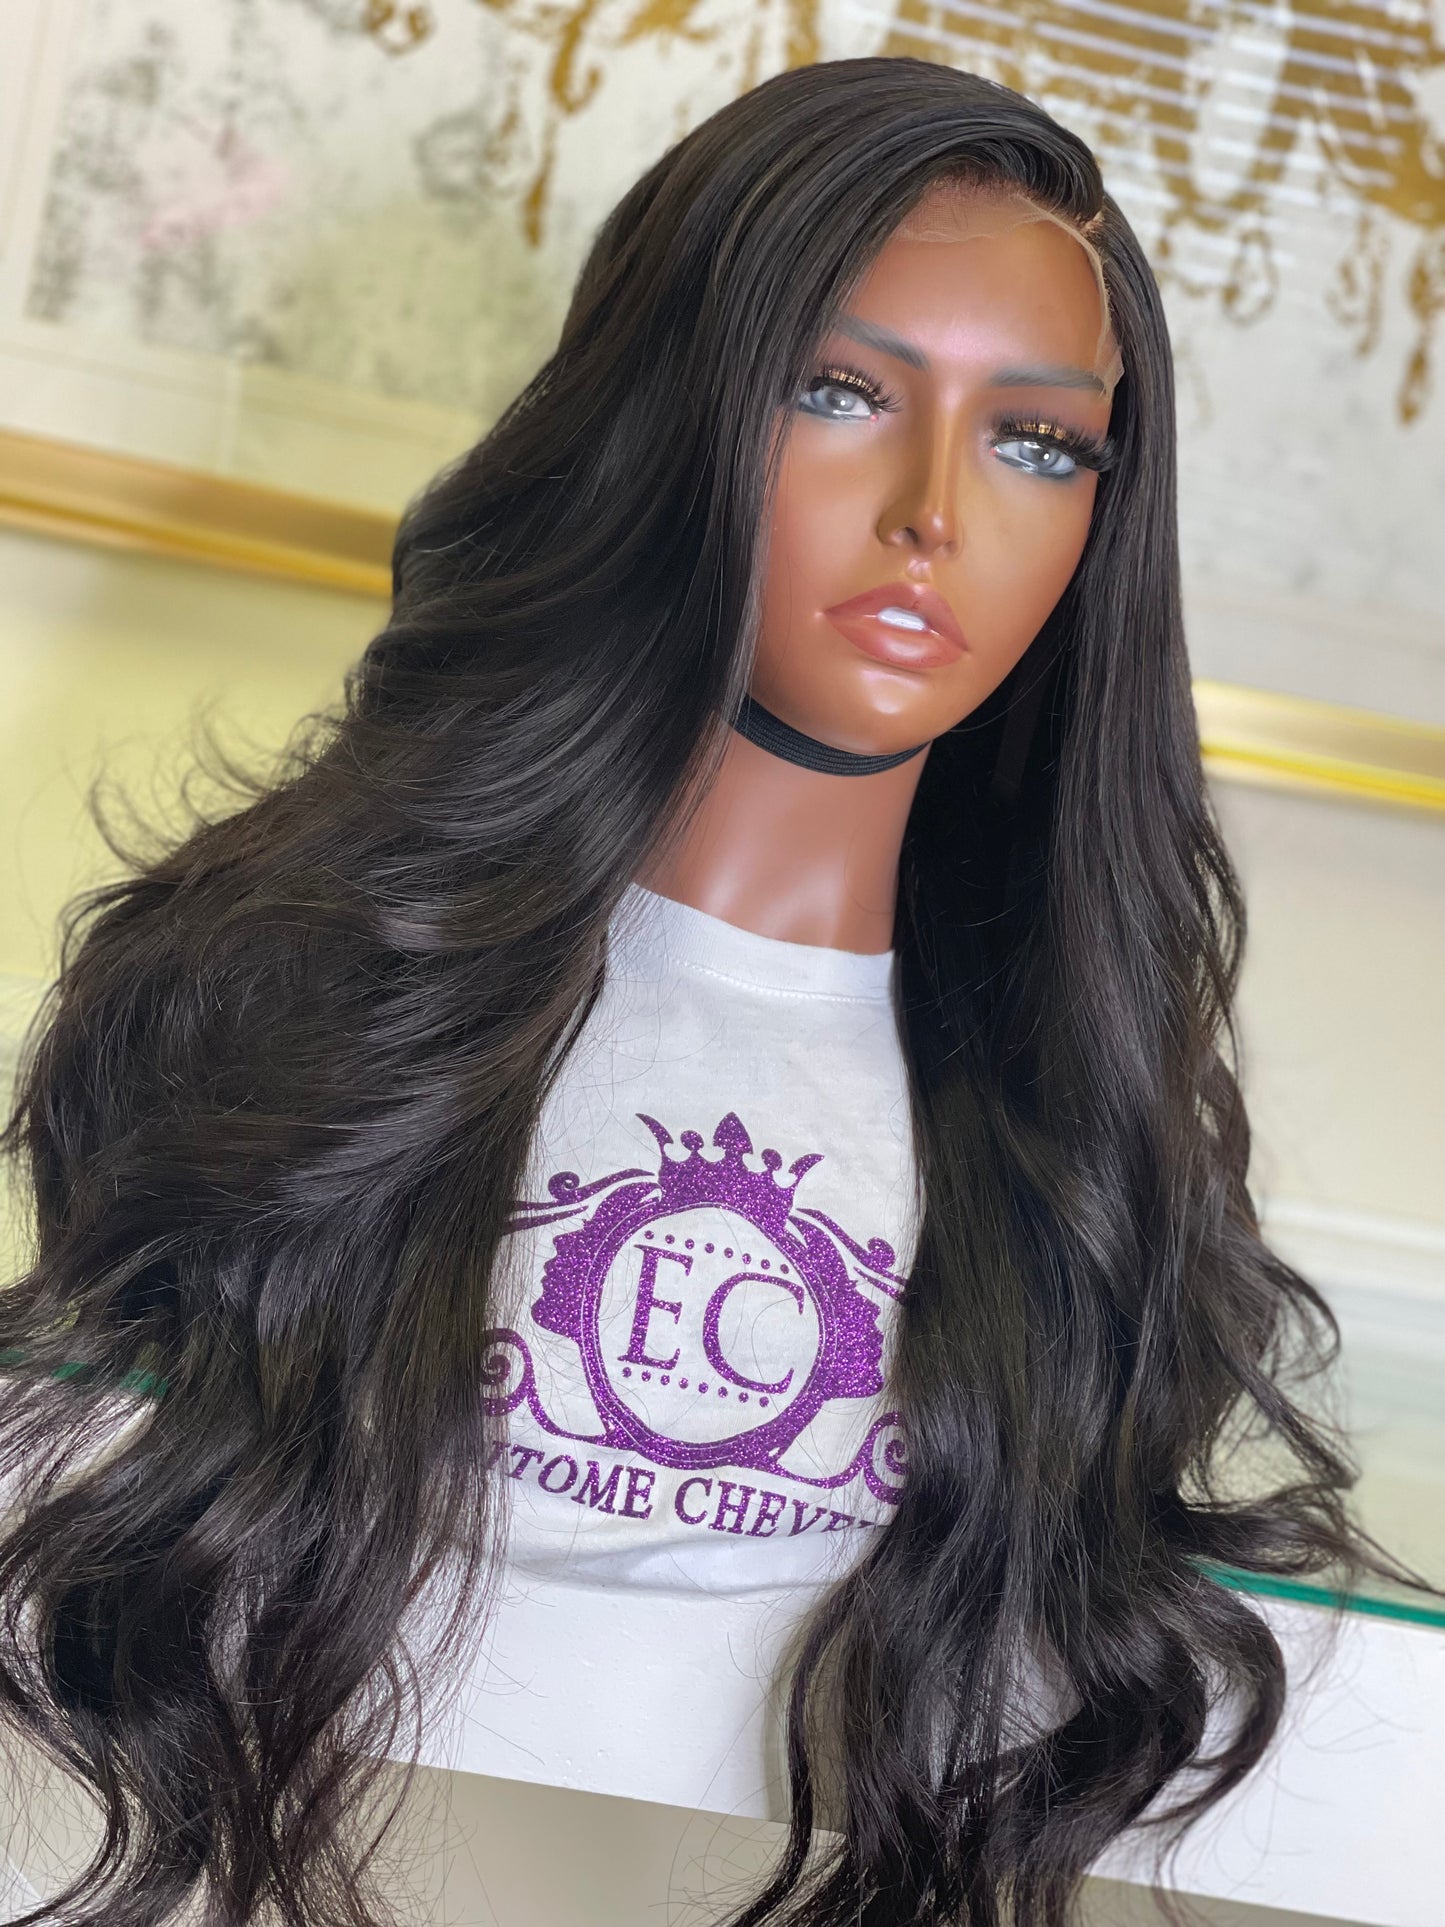 Brazilian Body Wave Collection